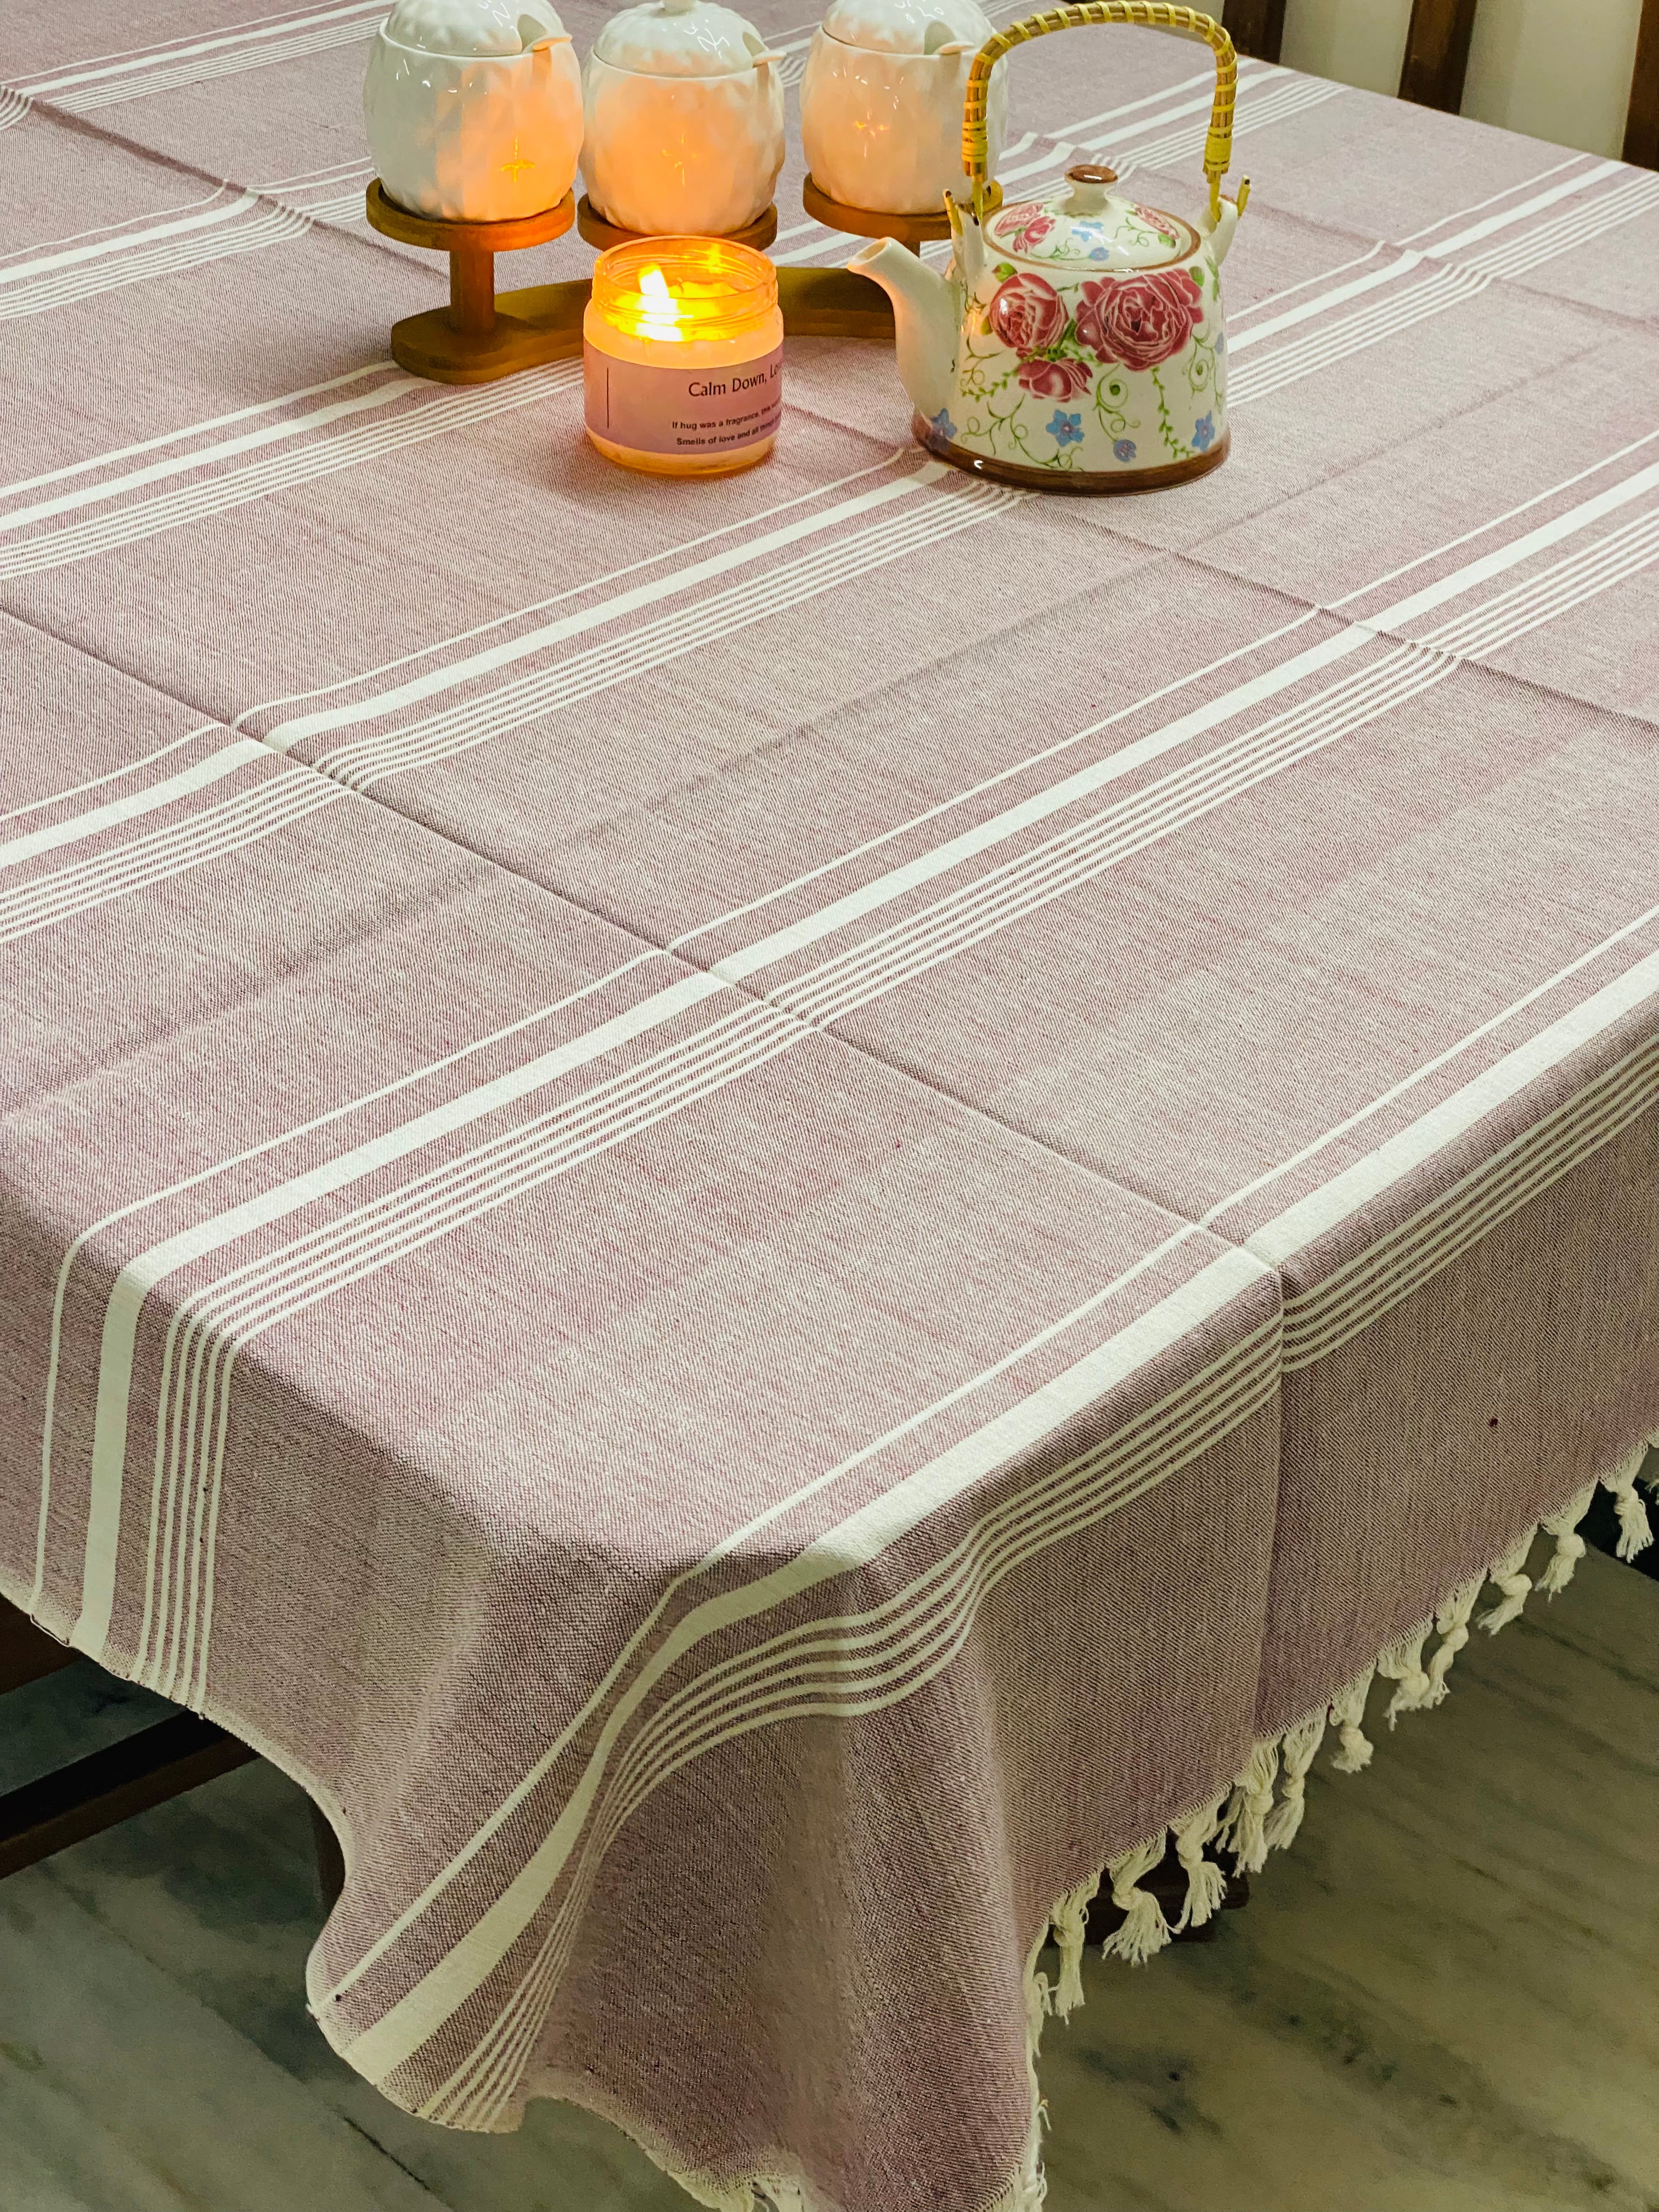 Woven Cotton Table Cloth 6 Seater (90*60 inches)